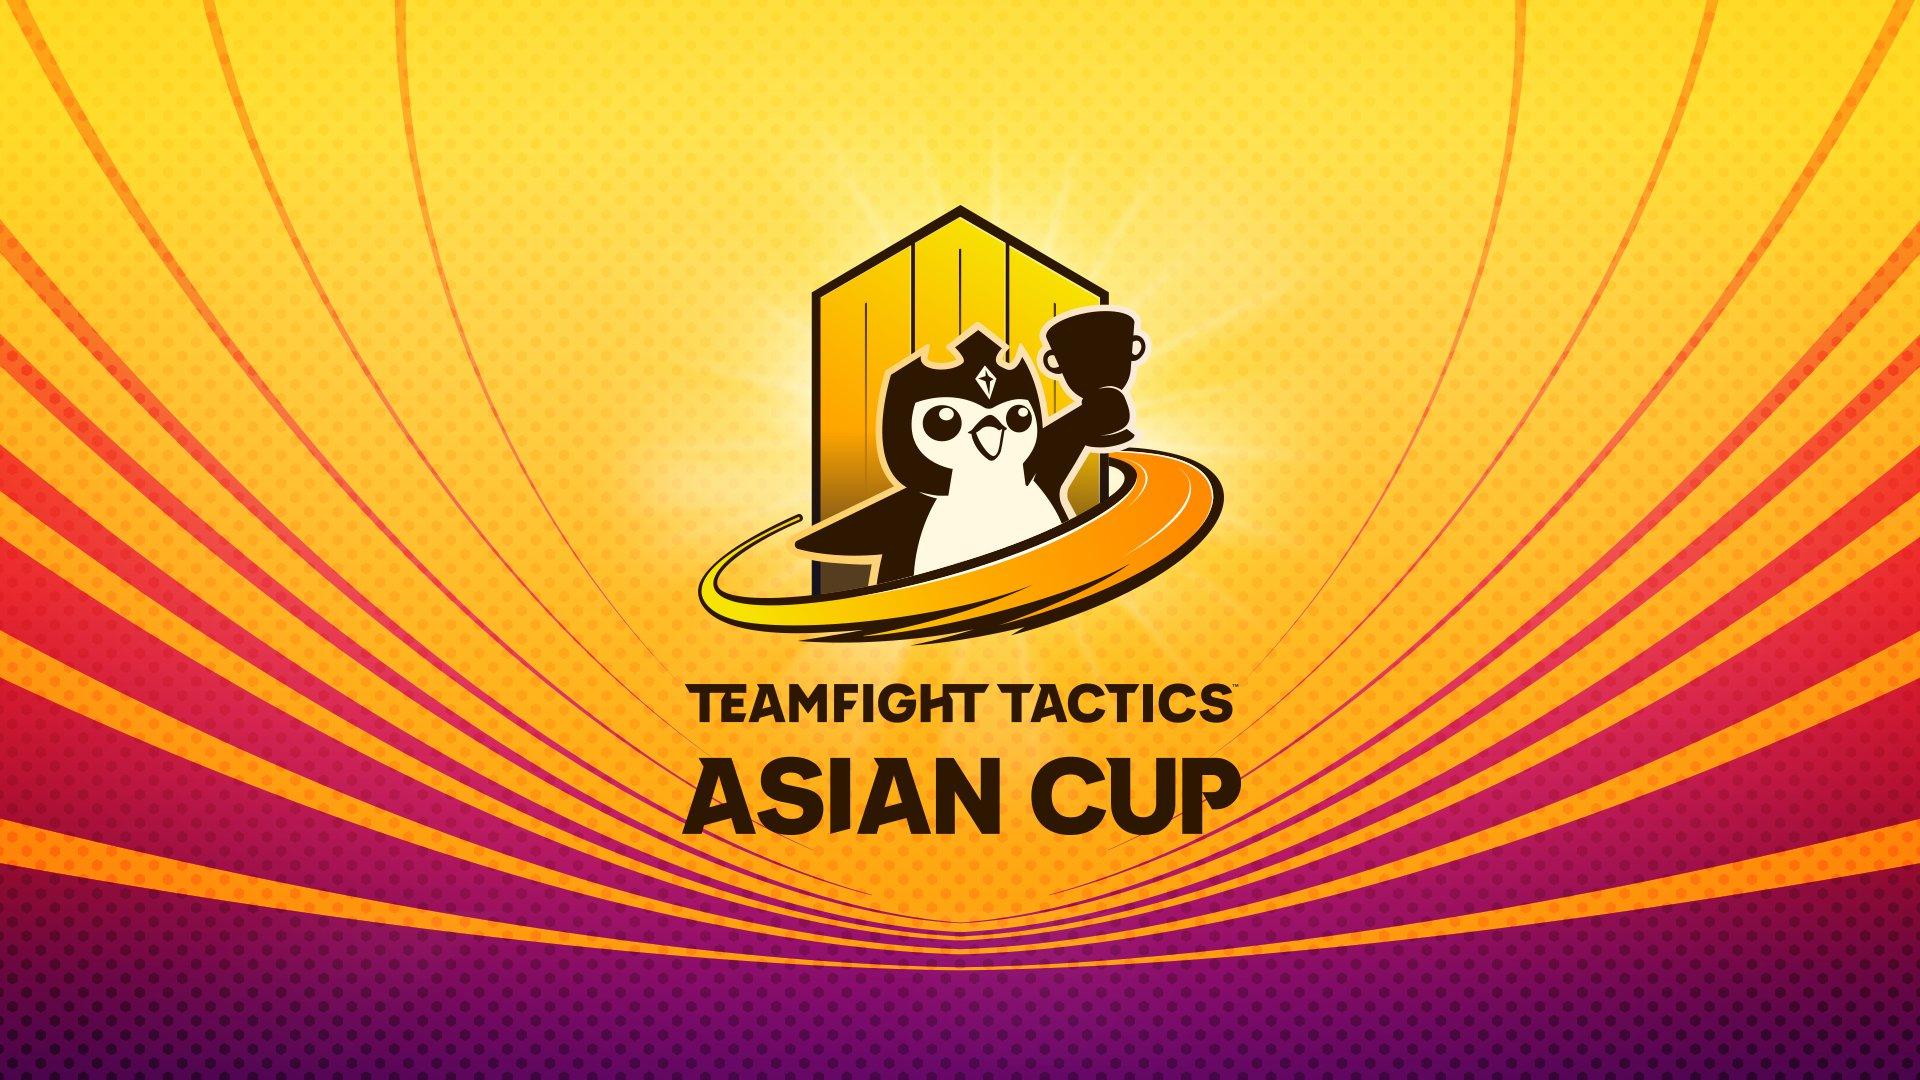 TFT Monsters Attack! Asian Cupの見出し画像